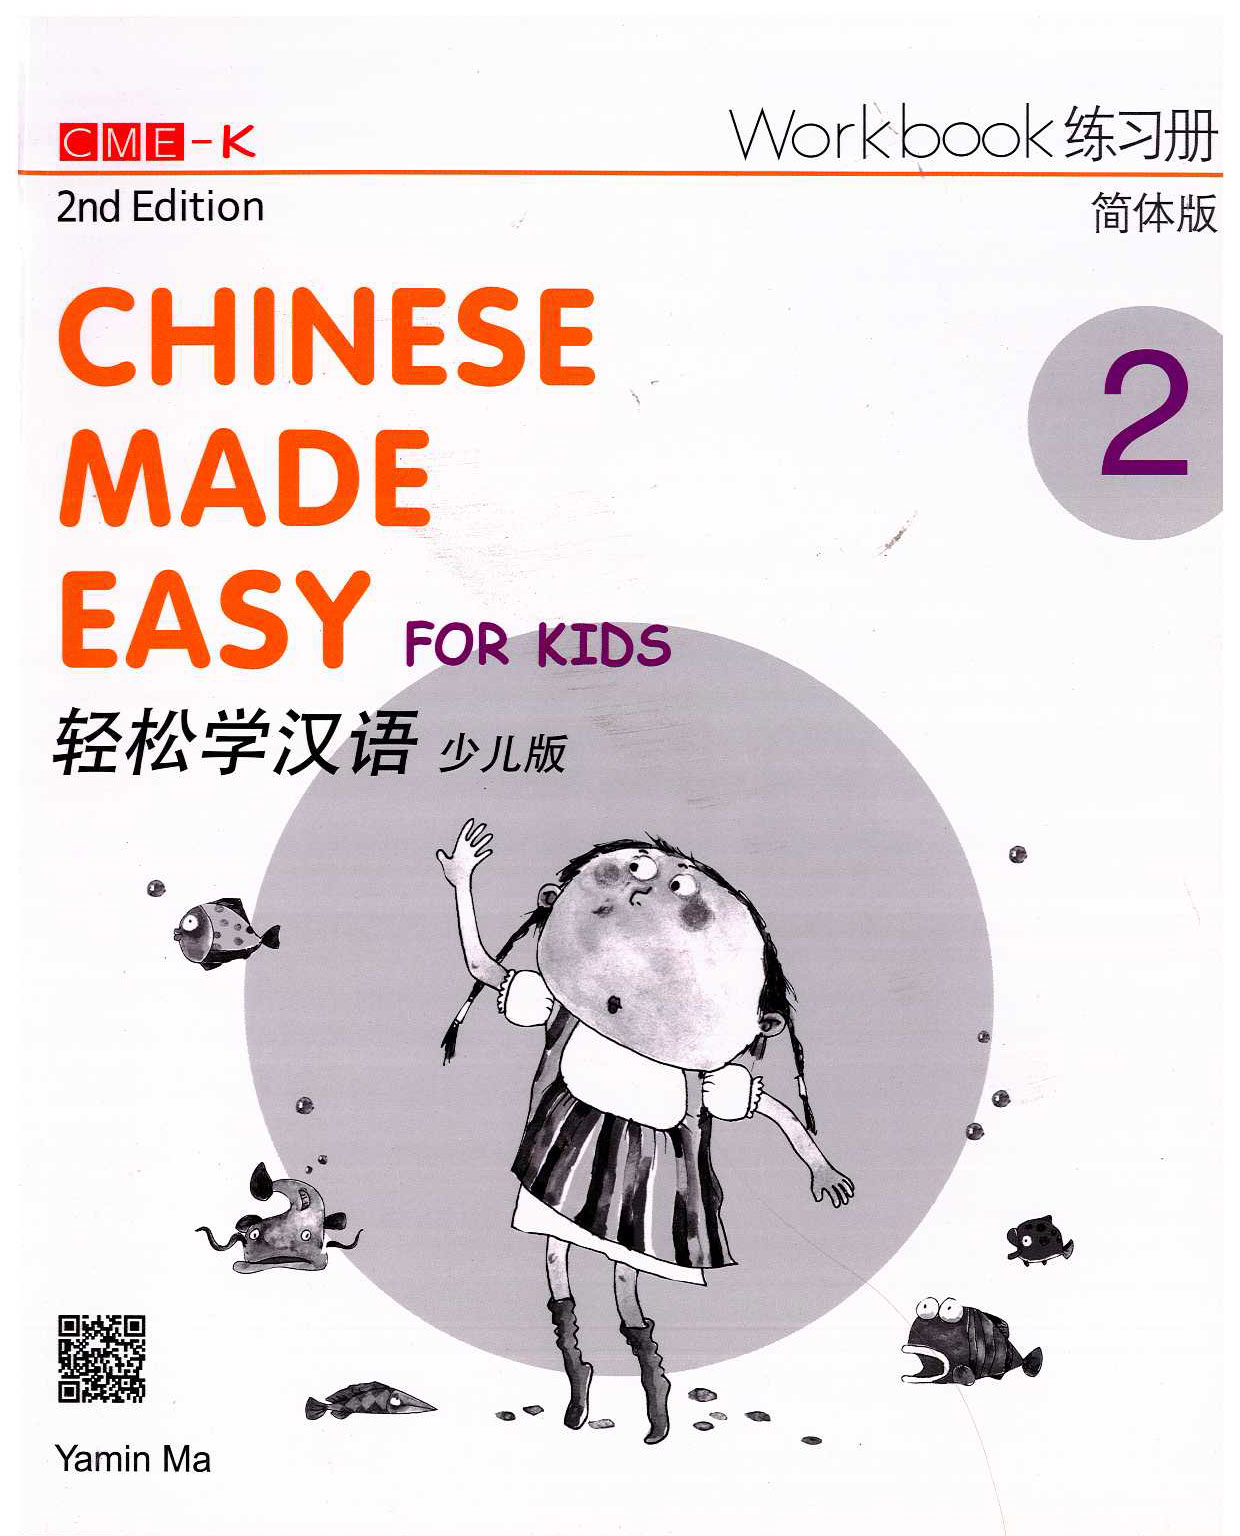 Chinese made easy for Kids. Chinese made easy. Workbook for Kids. Chinese made easy 1 Workbook.